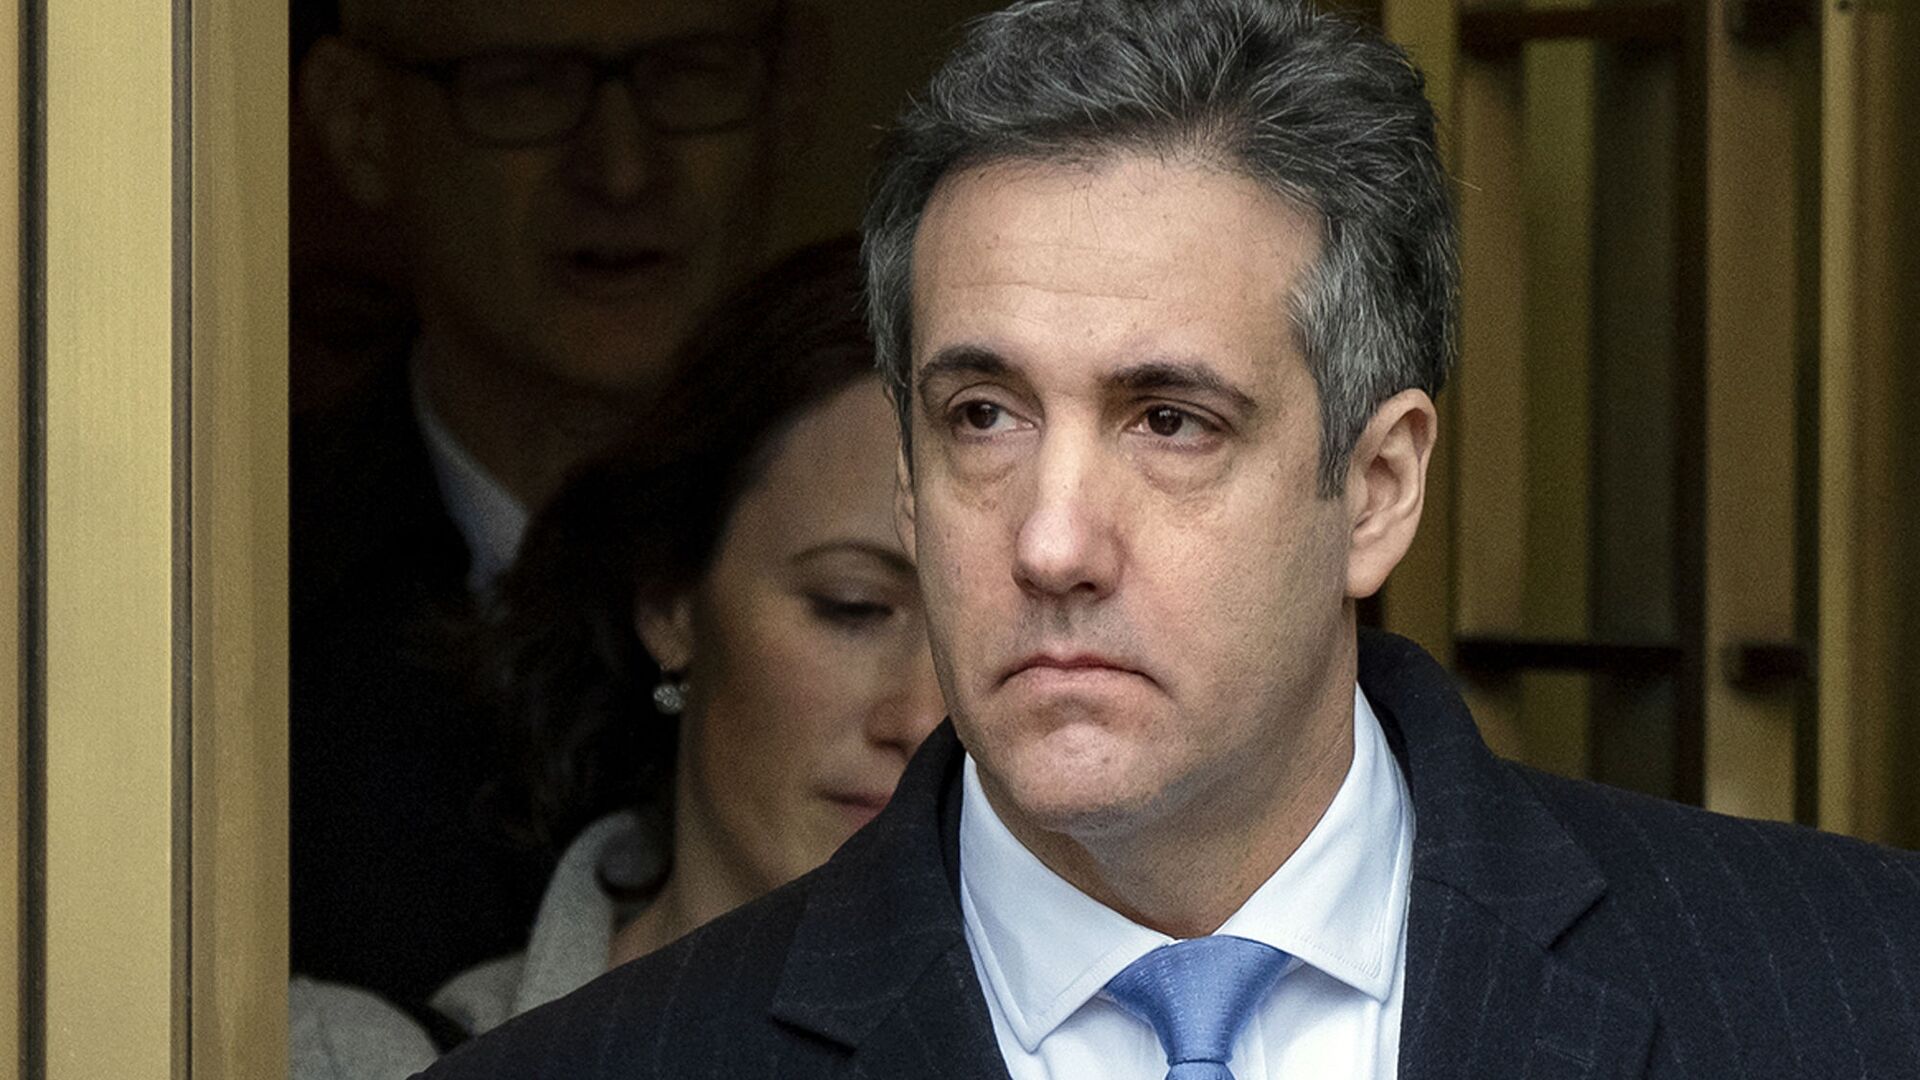 In this Dec. 12, 2018, file photo, Michael Cohen, President Donald Trump's former lawyer, leaves federal court after his sentencing in New York - Sputnik International, 1920, 13.11.2021